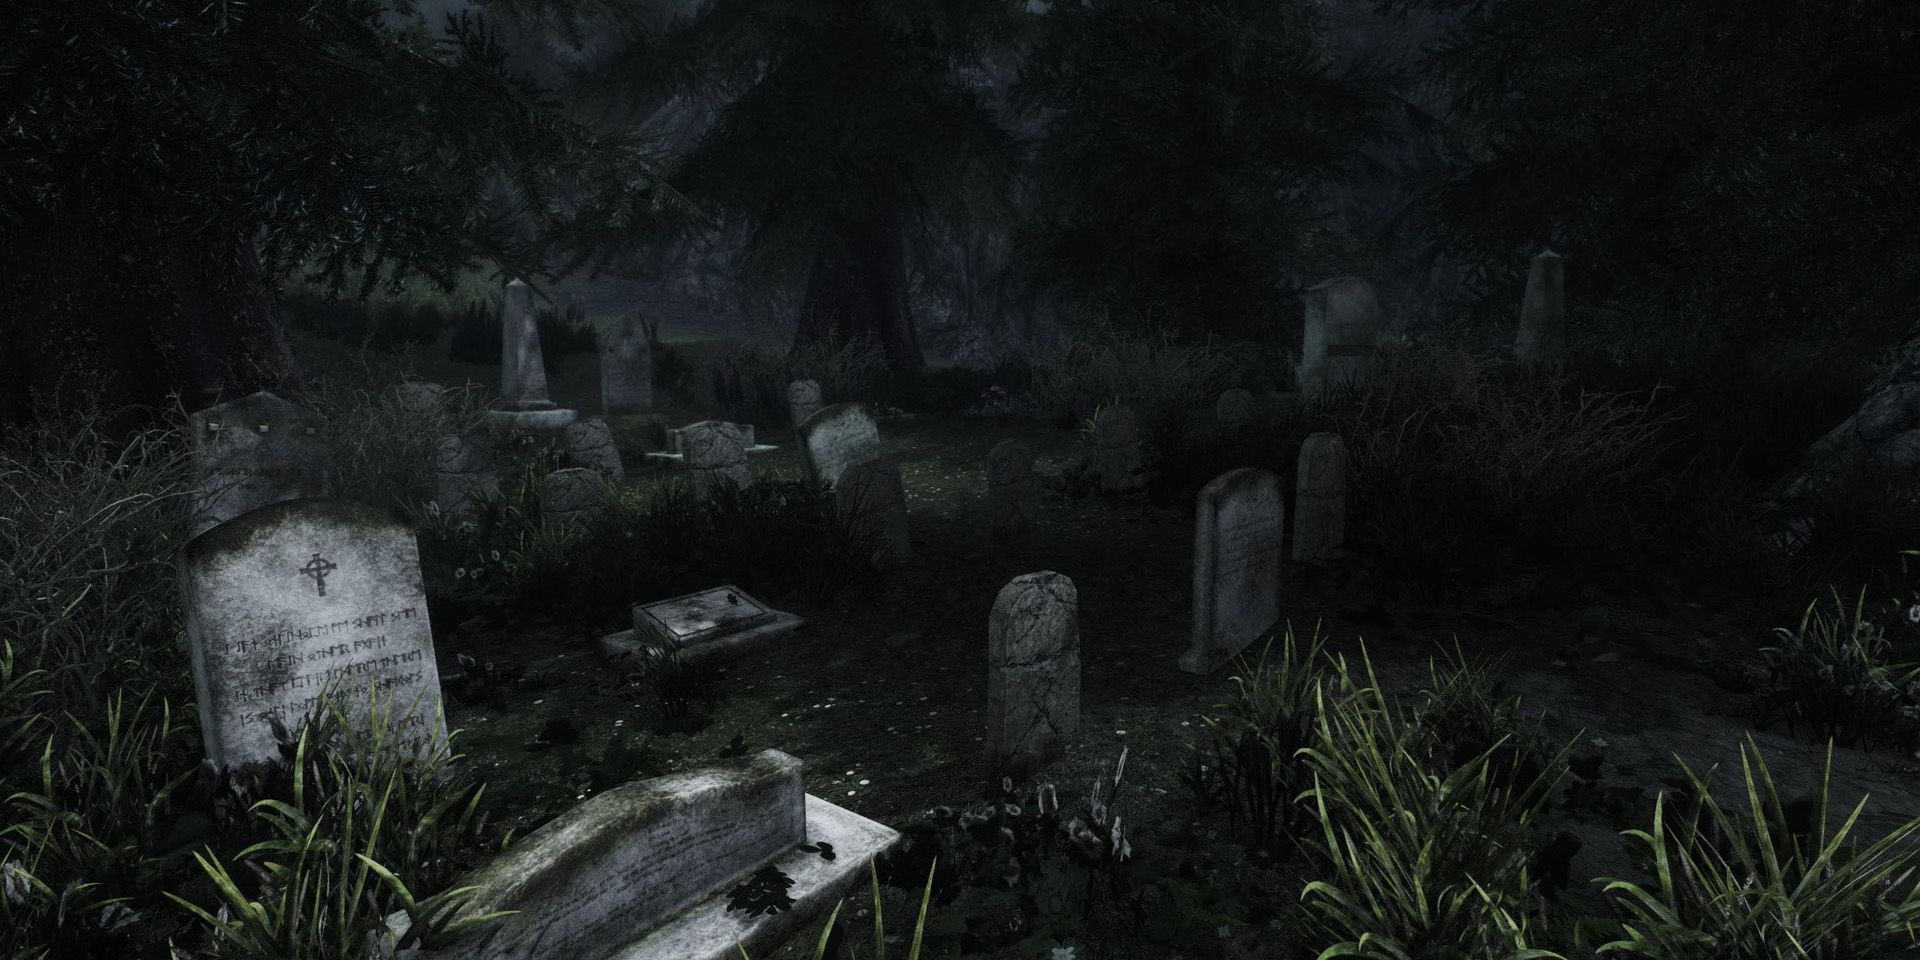 Some of the graves in Skyrim